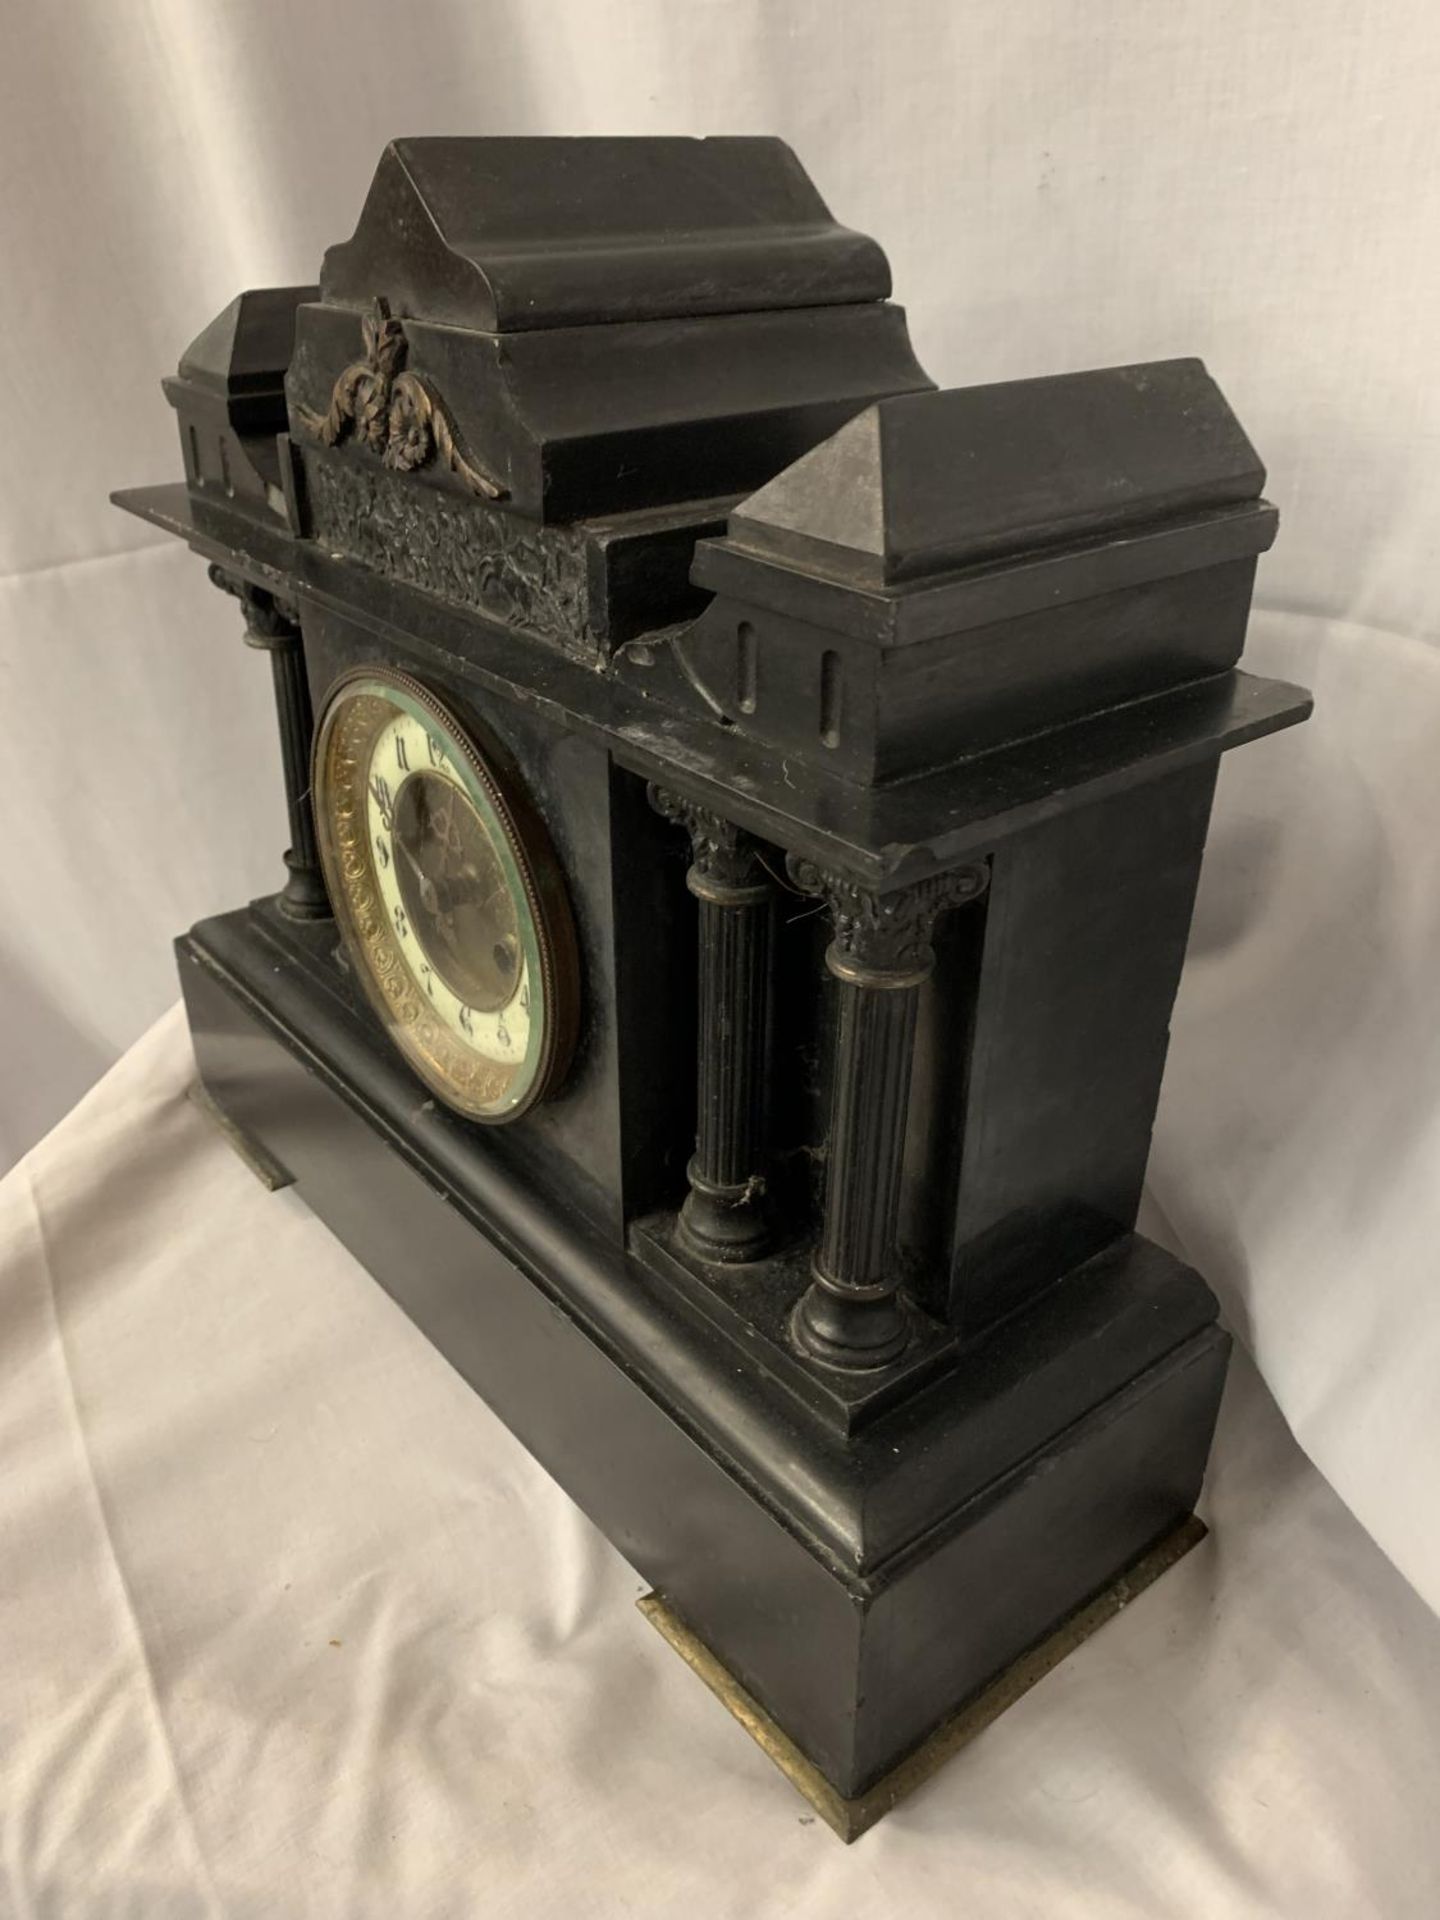 A LARGE SLATE MANTLE CLOCK WITH METAL COLUMNS - Image 3 of 4